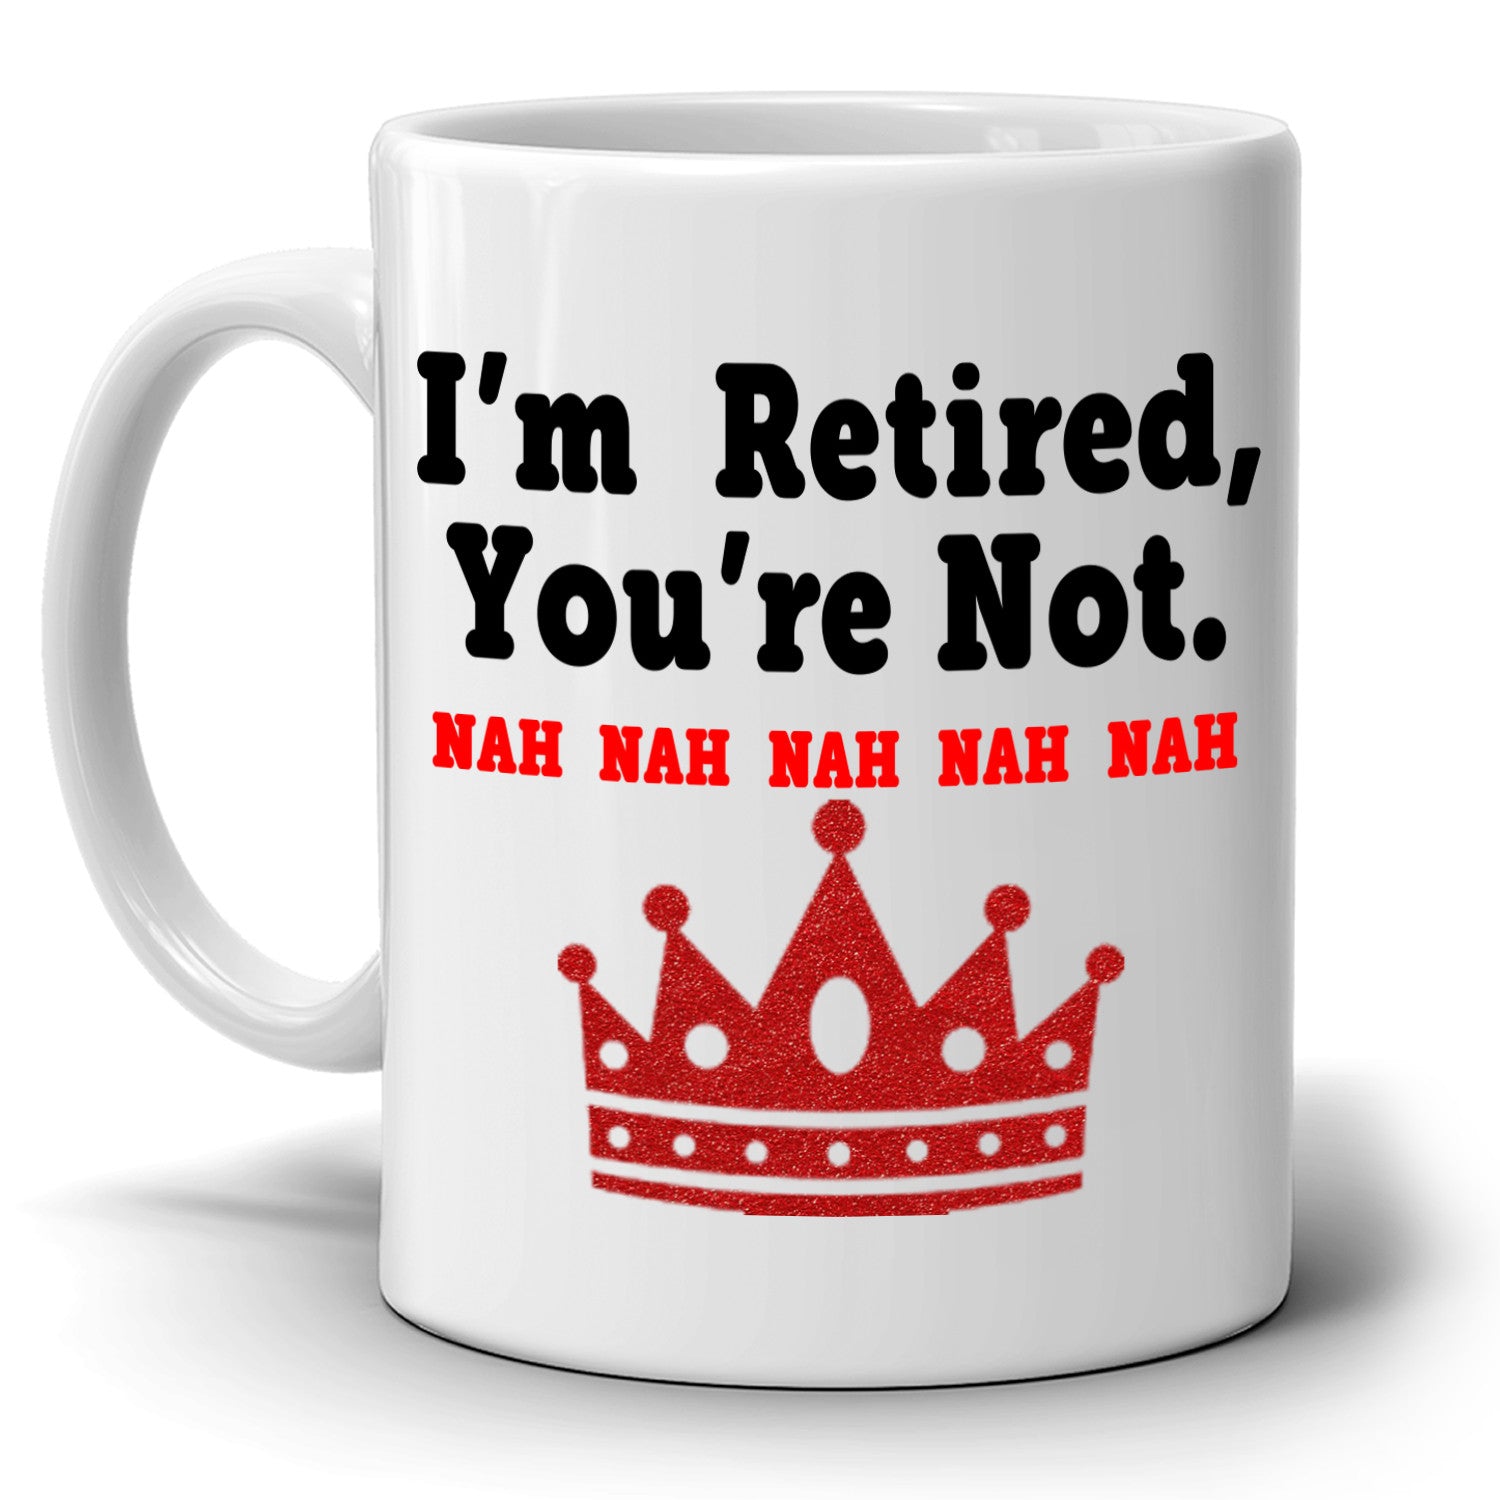 Funny Retirement Gifts For Men And Women Coffee Mug I M Retired You Re Not Gift Cup Printed On Both Sides